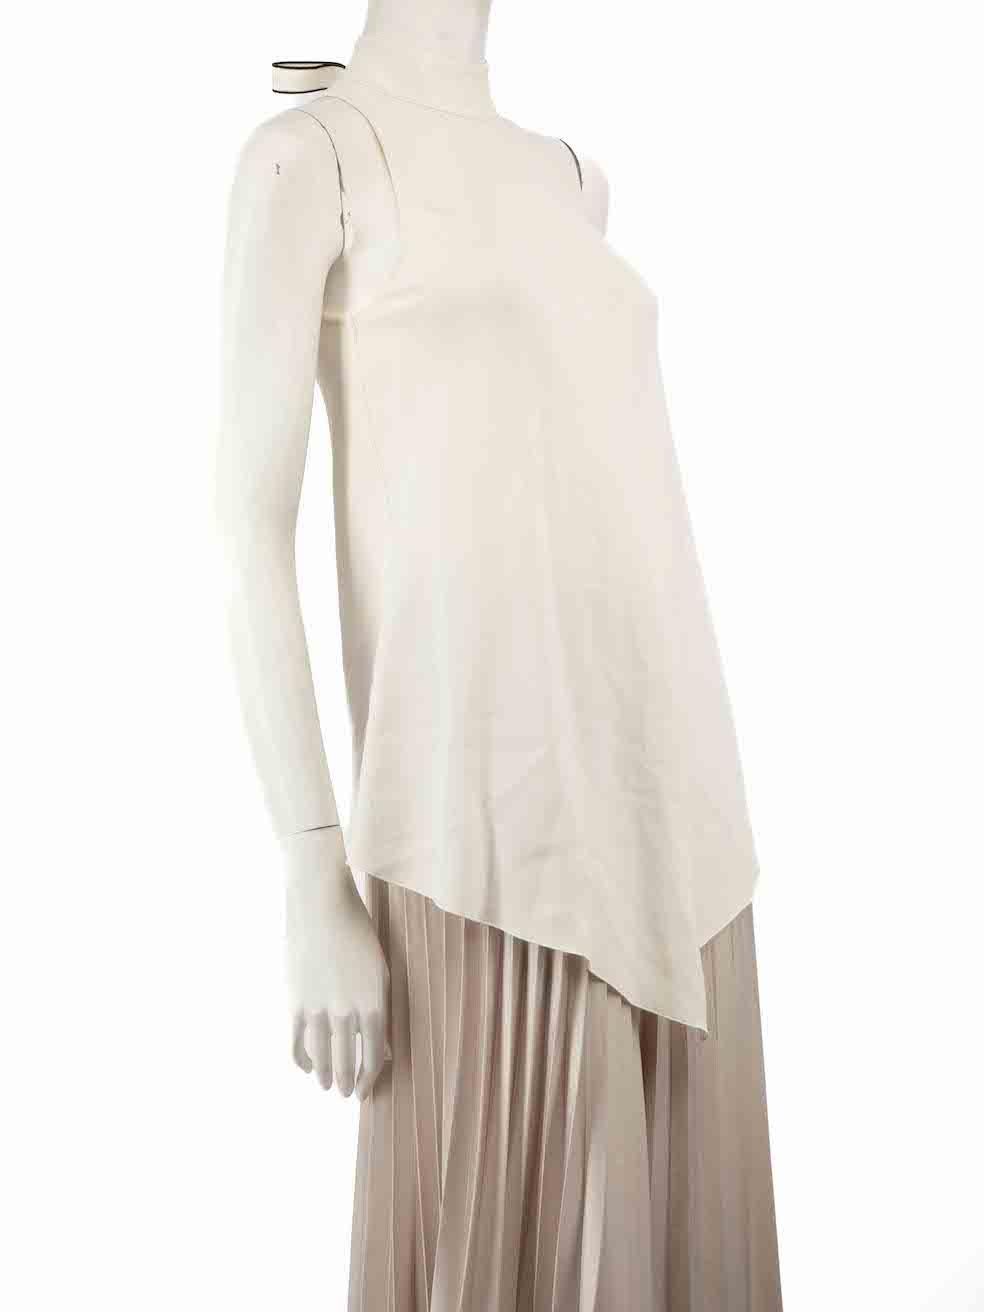 CONDITION is Very good. Minimal wear to top is evident. There are small marks to the front of the top on this used Proenza Schouler designer resale item.
 
 
 
 Details
 
 
 Ecru
 
 Synthetic
 
 Sleeveless top
 
 Mock neckline
 
 Bow detail on rear
